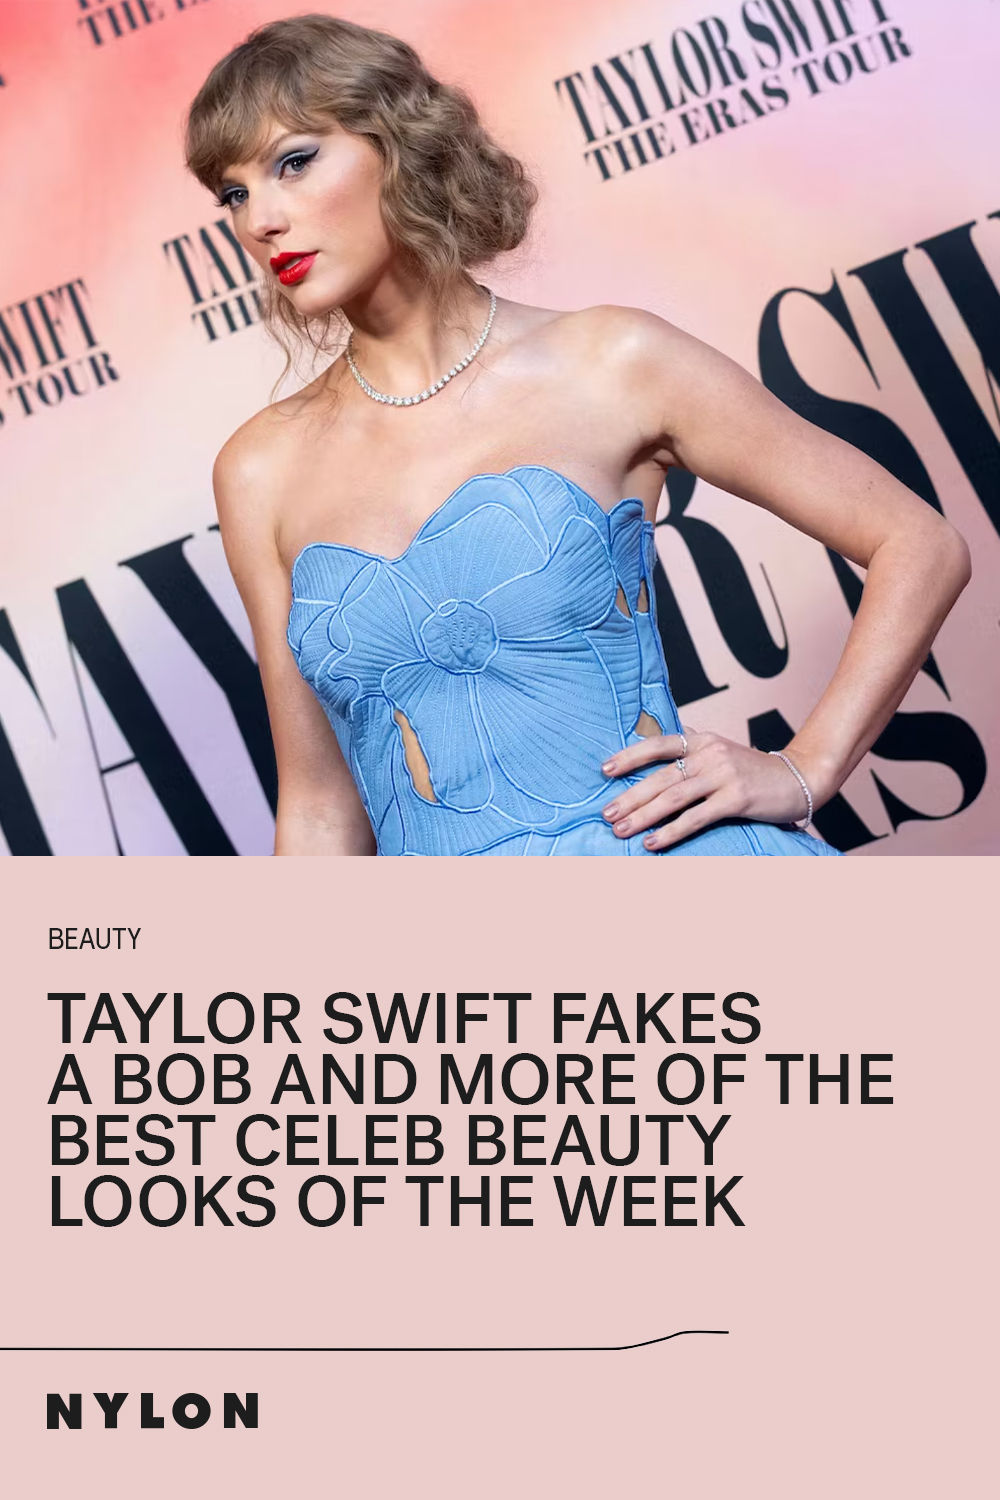 chris lewczyk recommends taylor swift fakes pic